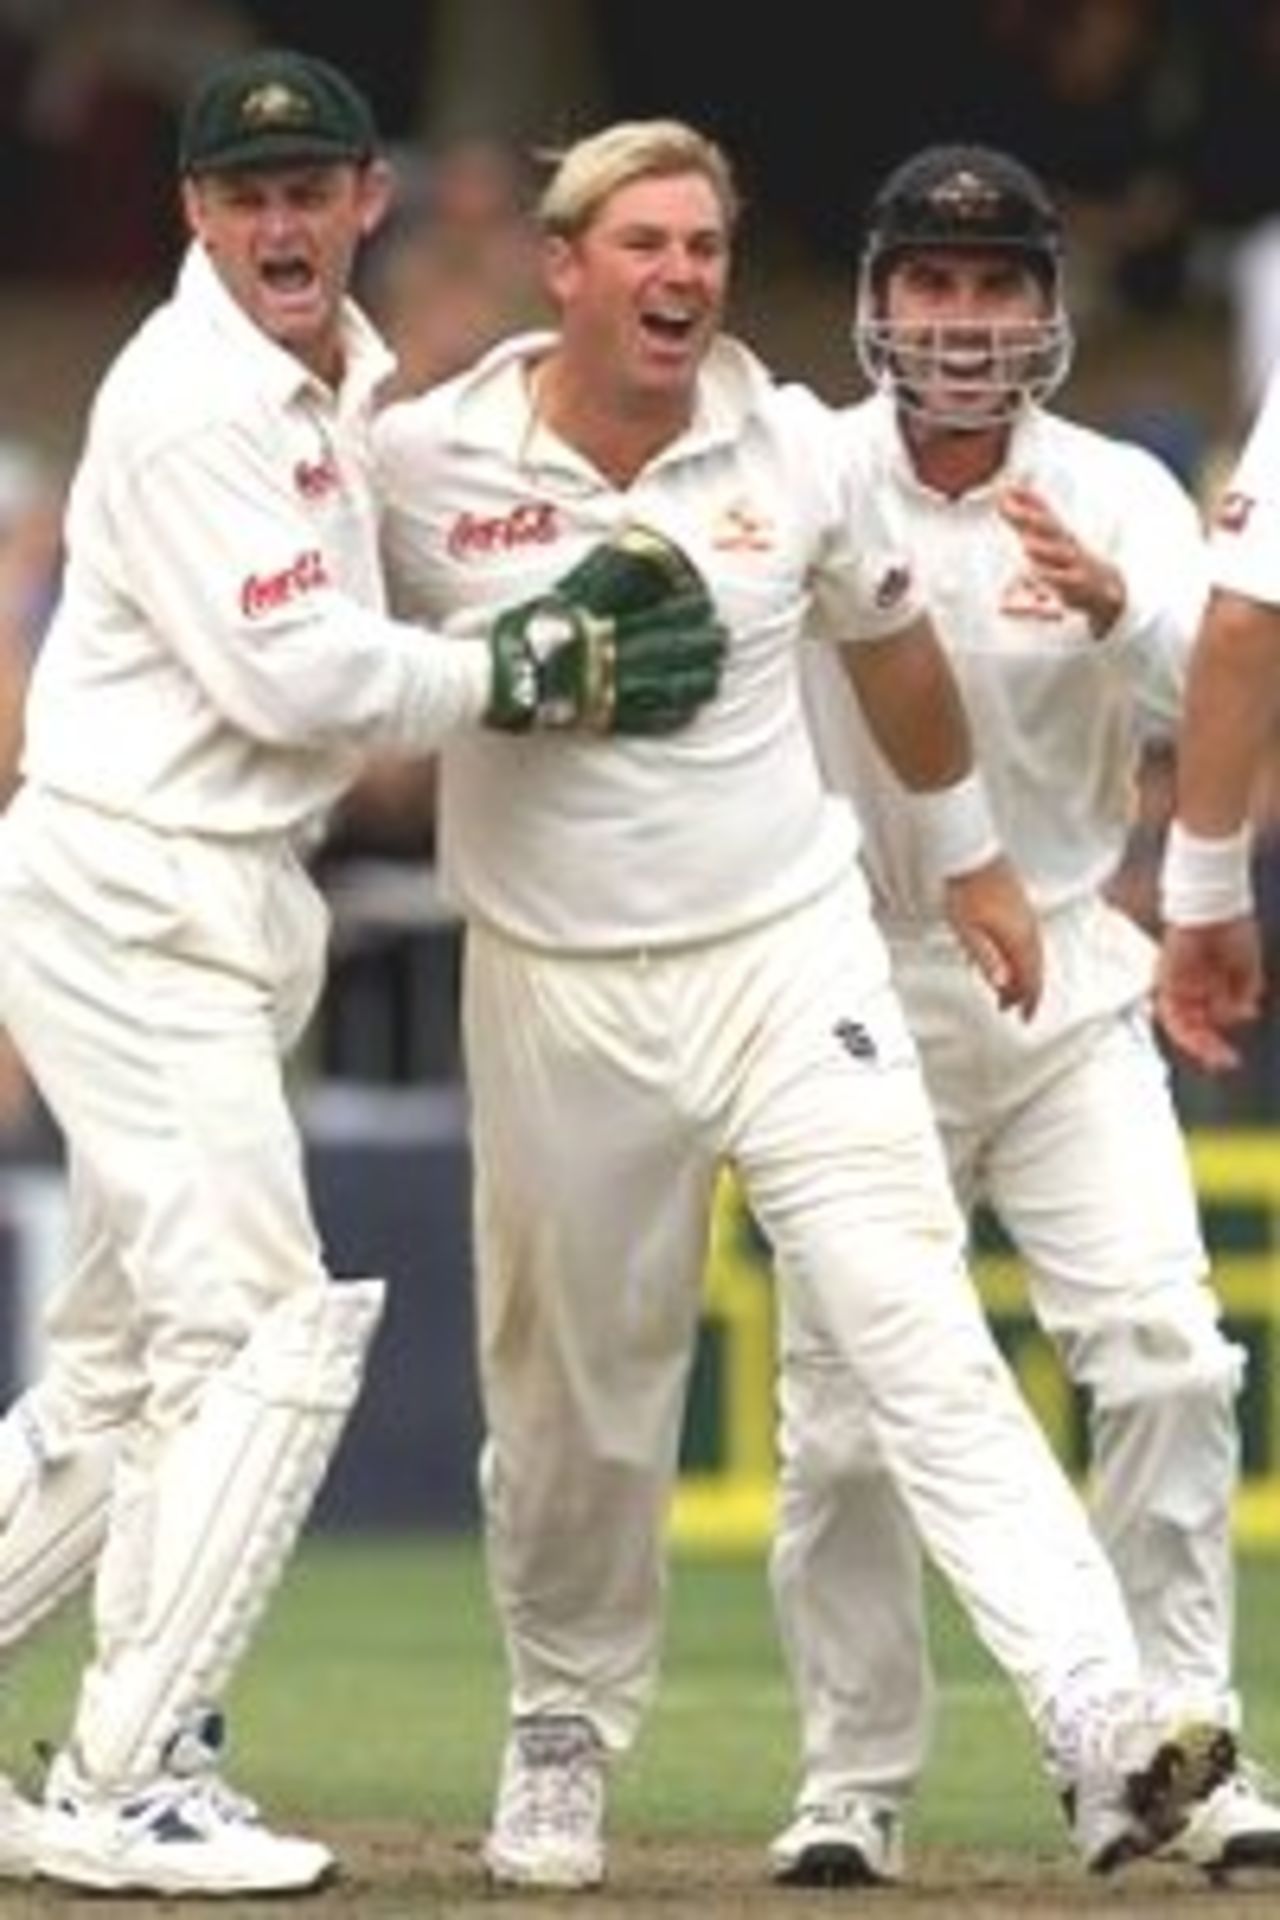 02 Apr 2000: Shane Warne of Australia celebrates with Adam Gilchrist after Gilchrist caught Craig McMillan of New Zealand off Warne's bowling during day three of the third test between New Zealand and Australia, at WestpacTrust Park, Hamilton, New Zealand.